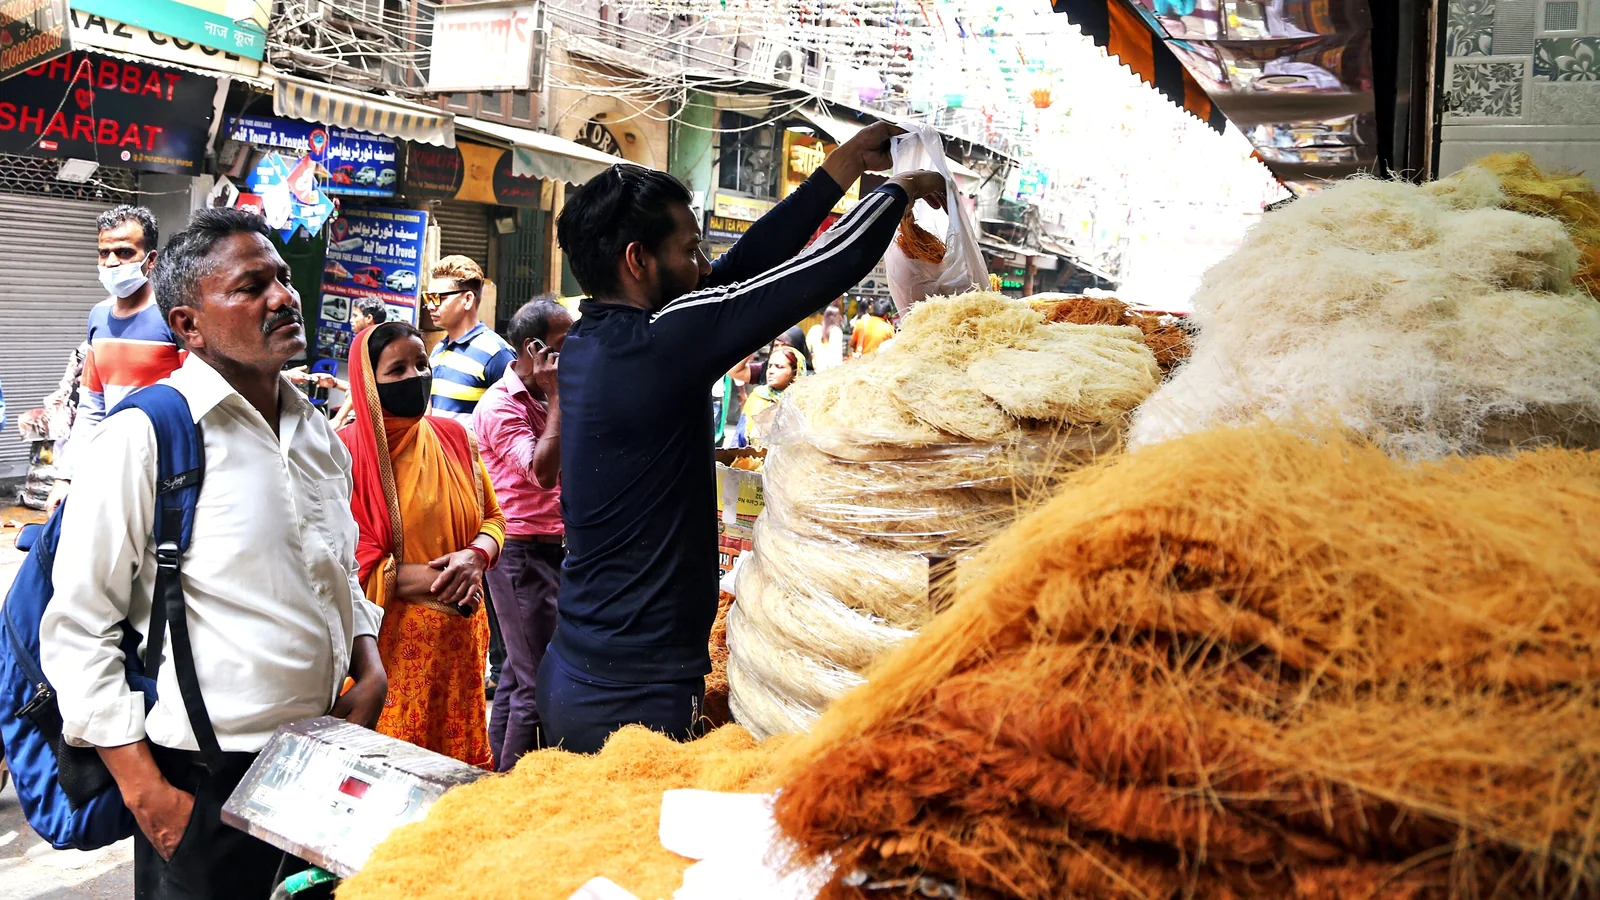 Huge crowd at Delhi’s Jama Masjid market as people throng for Eid shopping